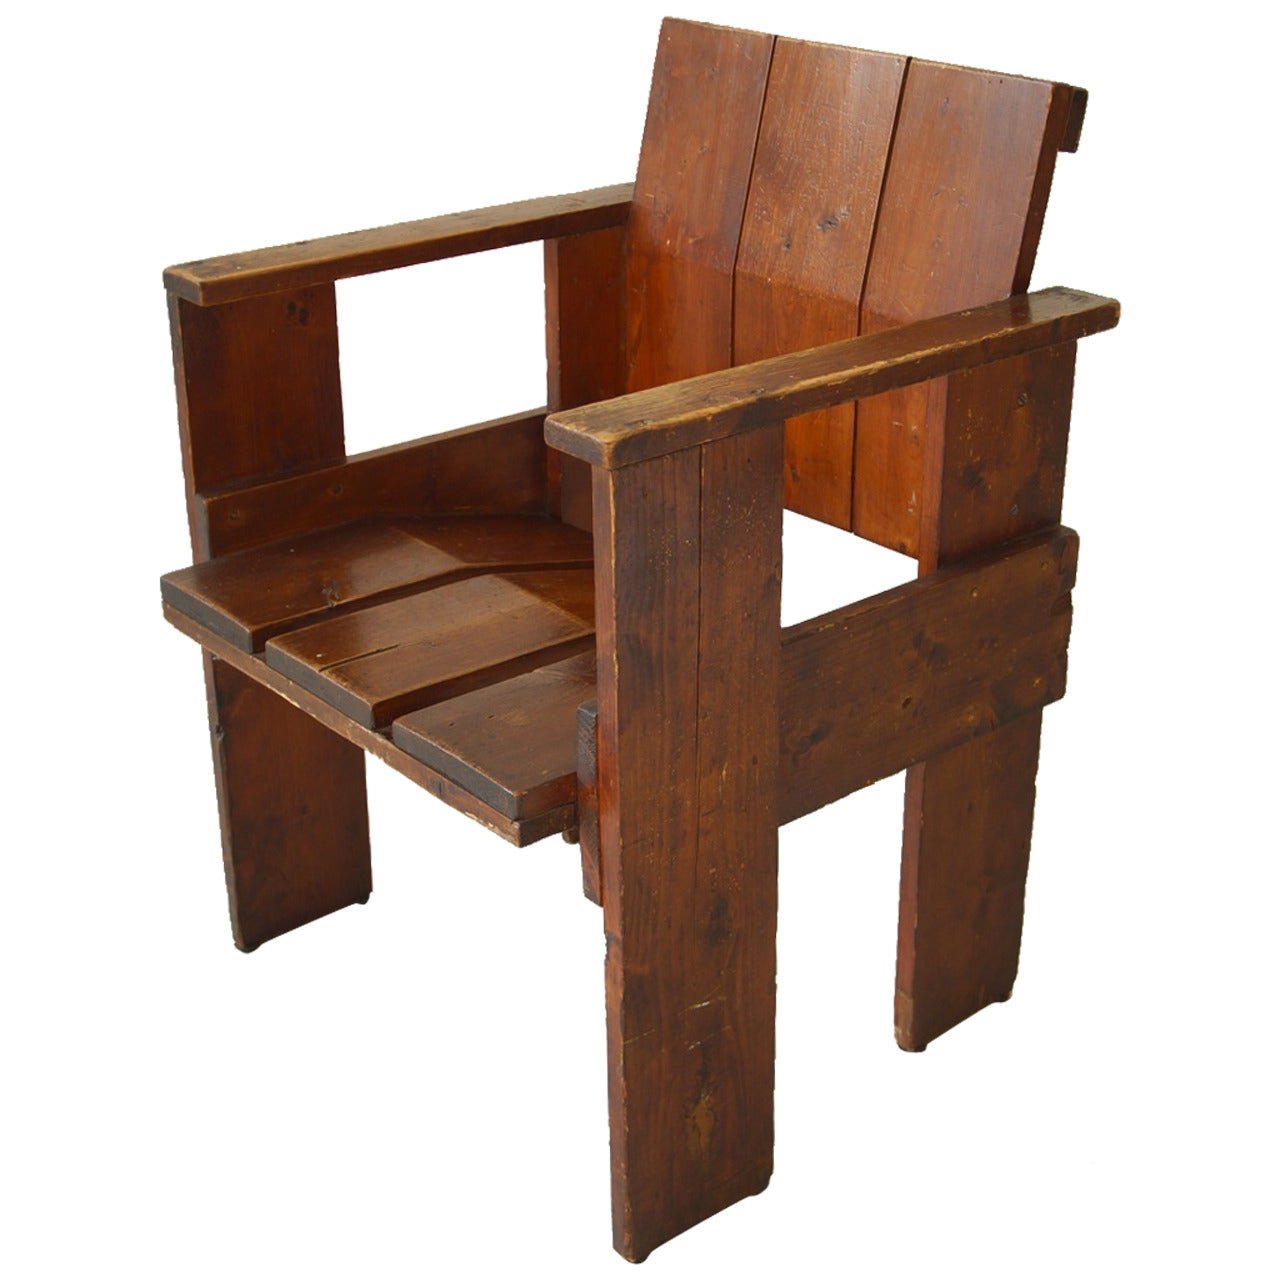 Albatros Crate Chair by Gerrit Rietveld For Sale